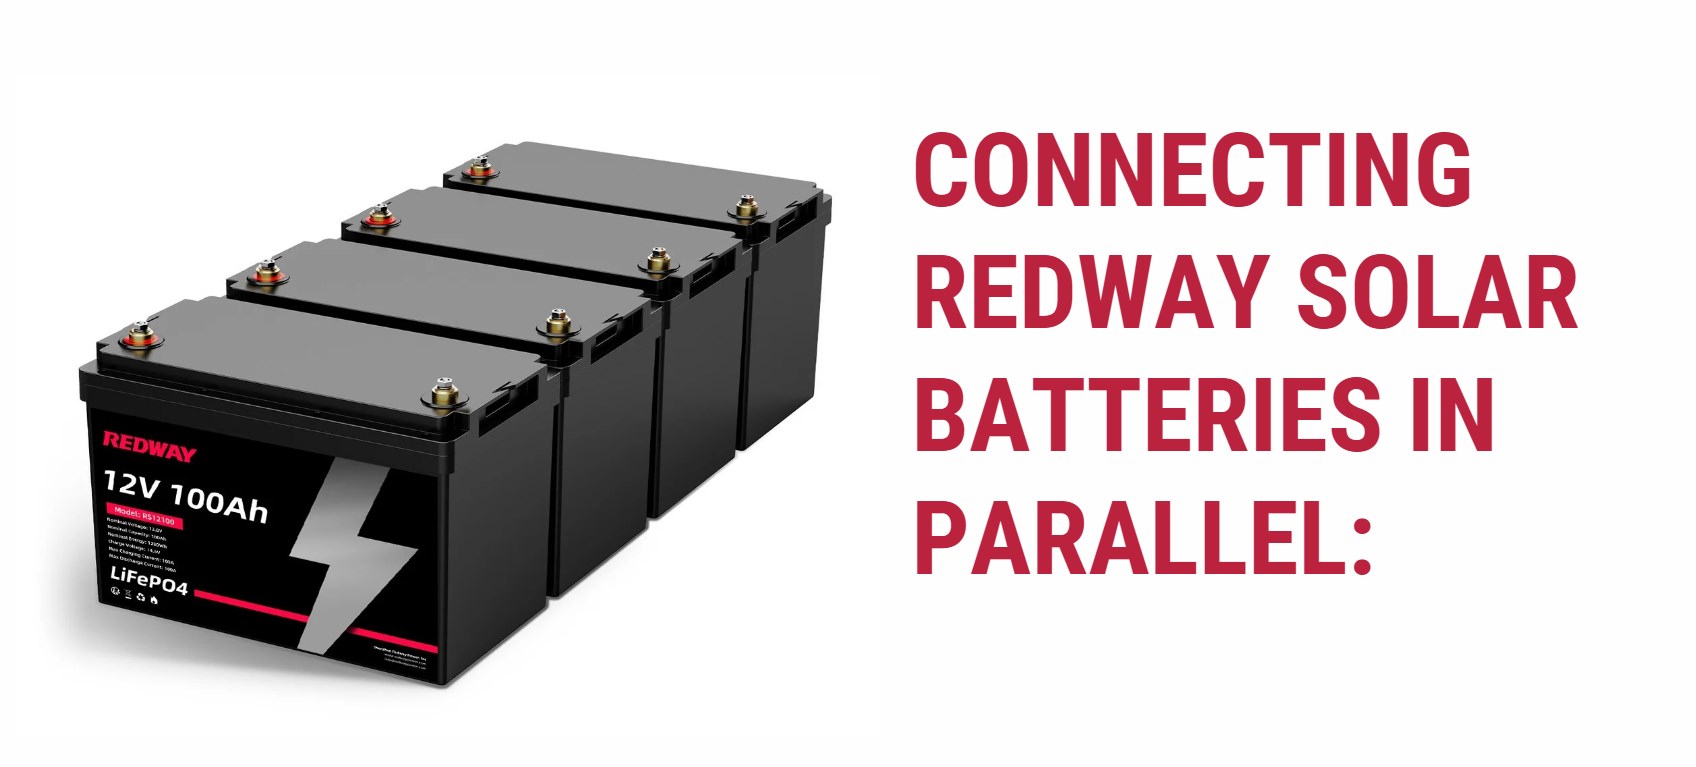 Connecting Redway solar batteries in parallel: